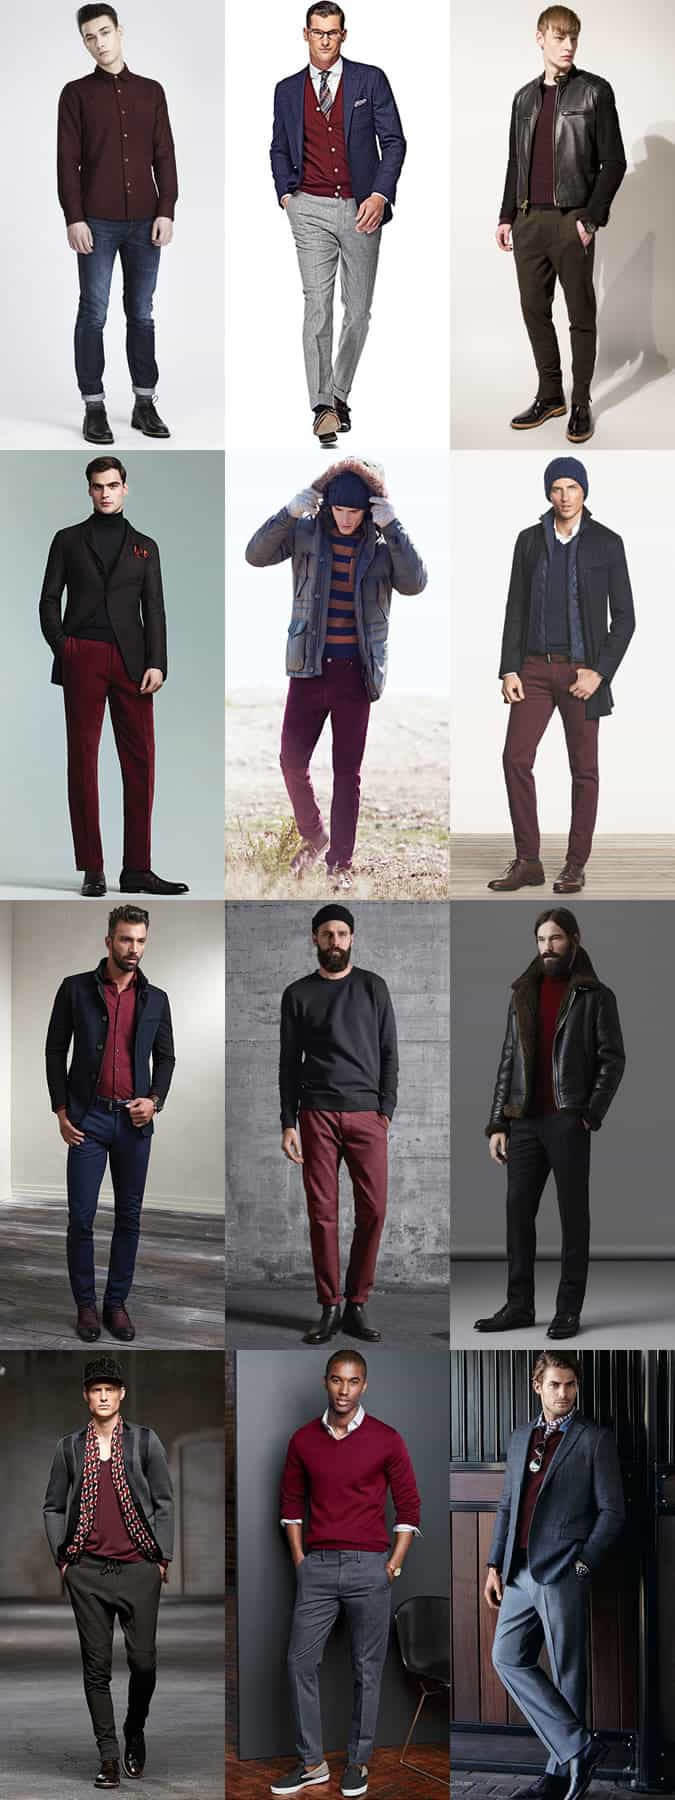 Men's Burgundy Staples (Knitwear, Shirts, T-Shirts, Trousers/Chinos) - Autumn/Winter Outfit Inspiration Lookbook